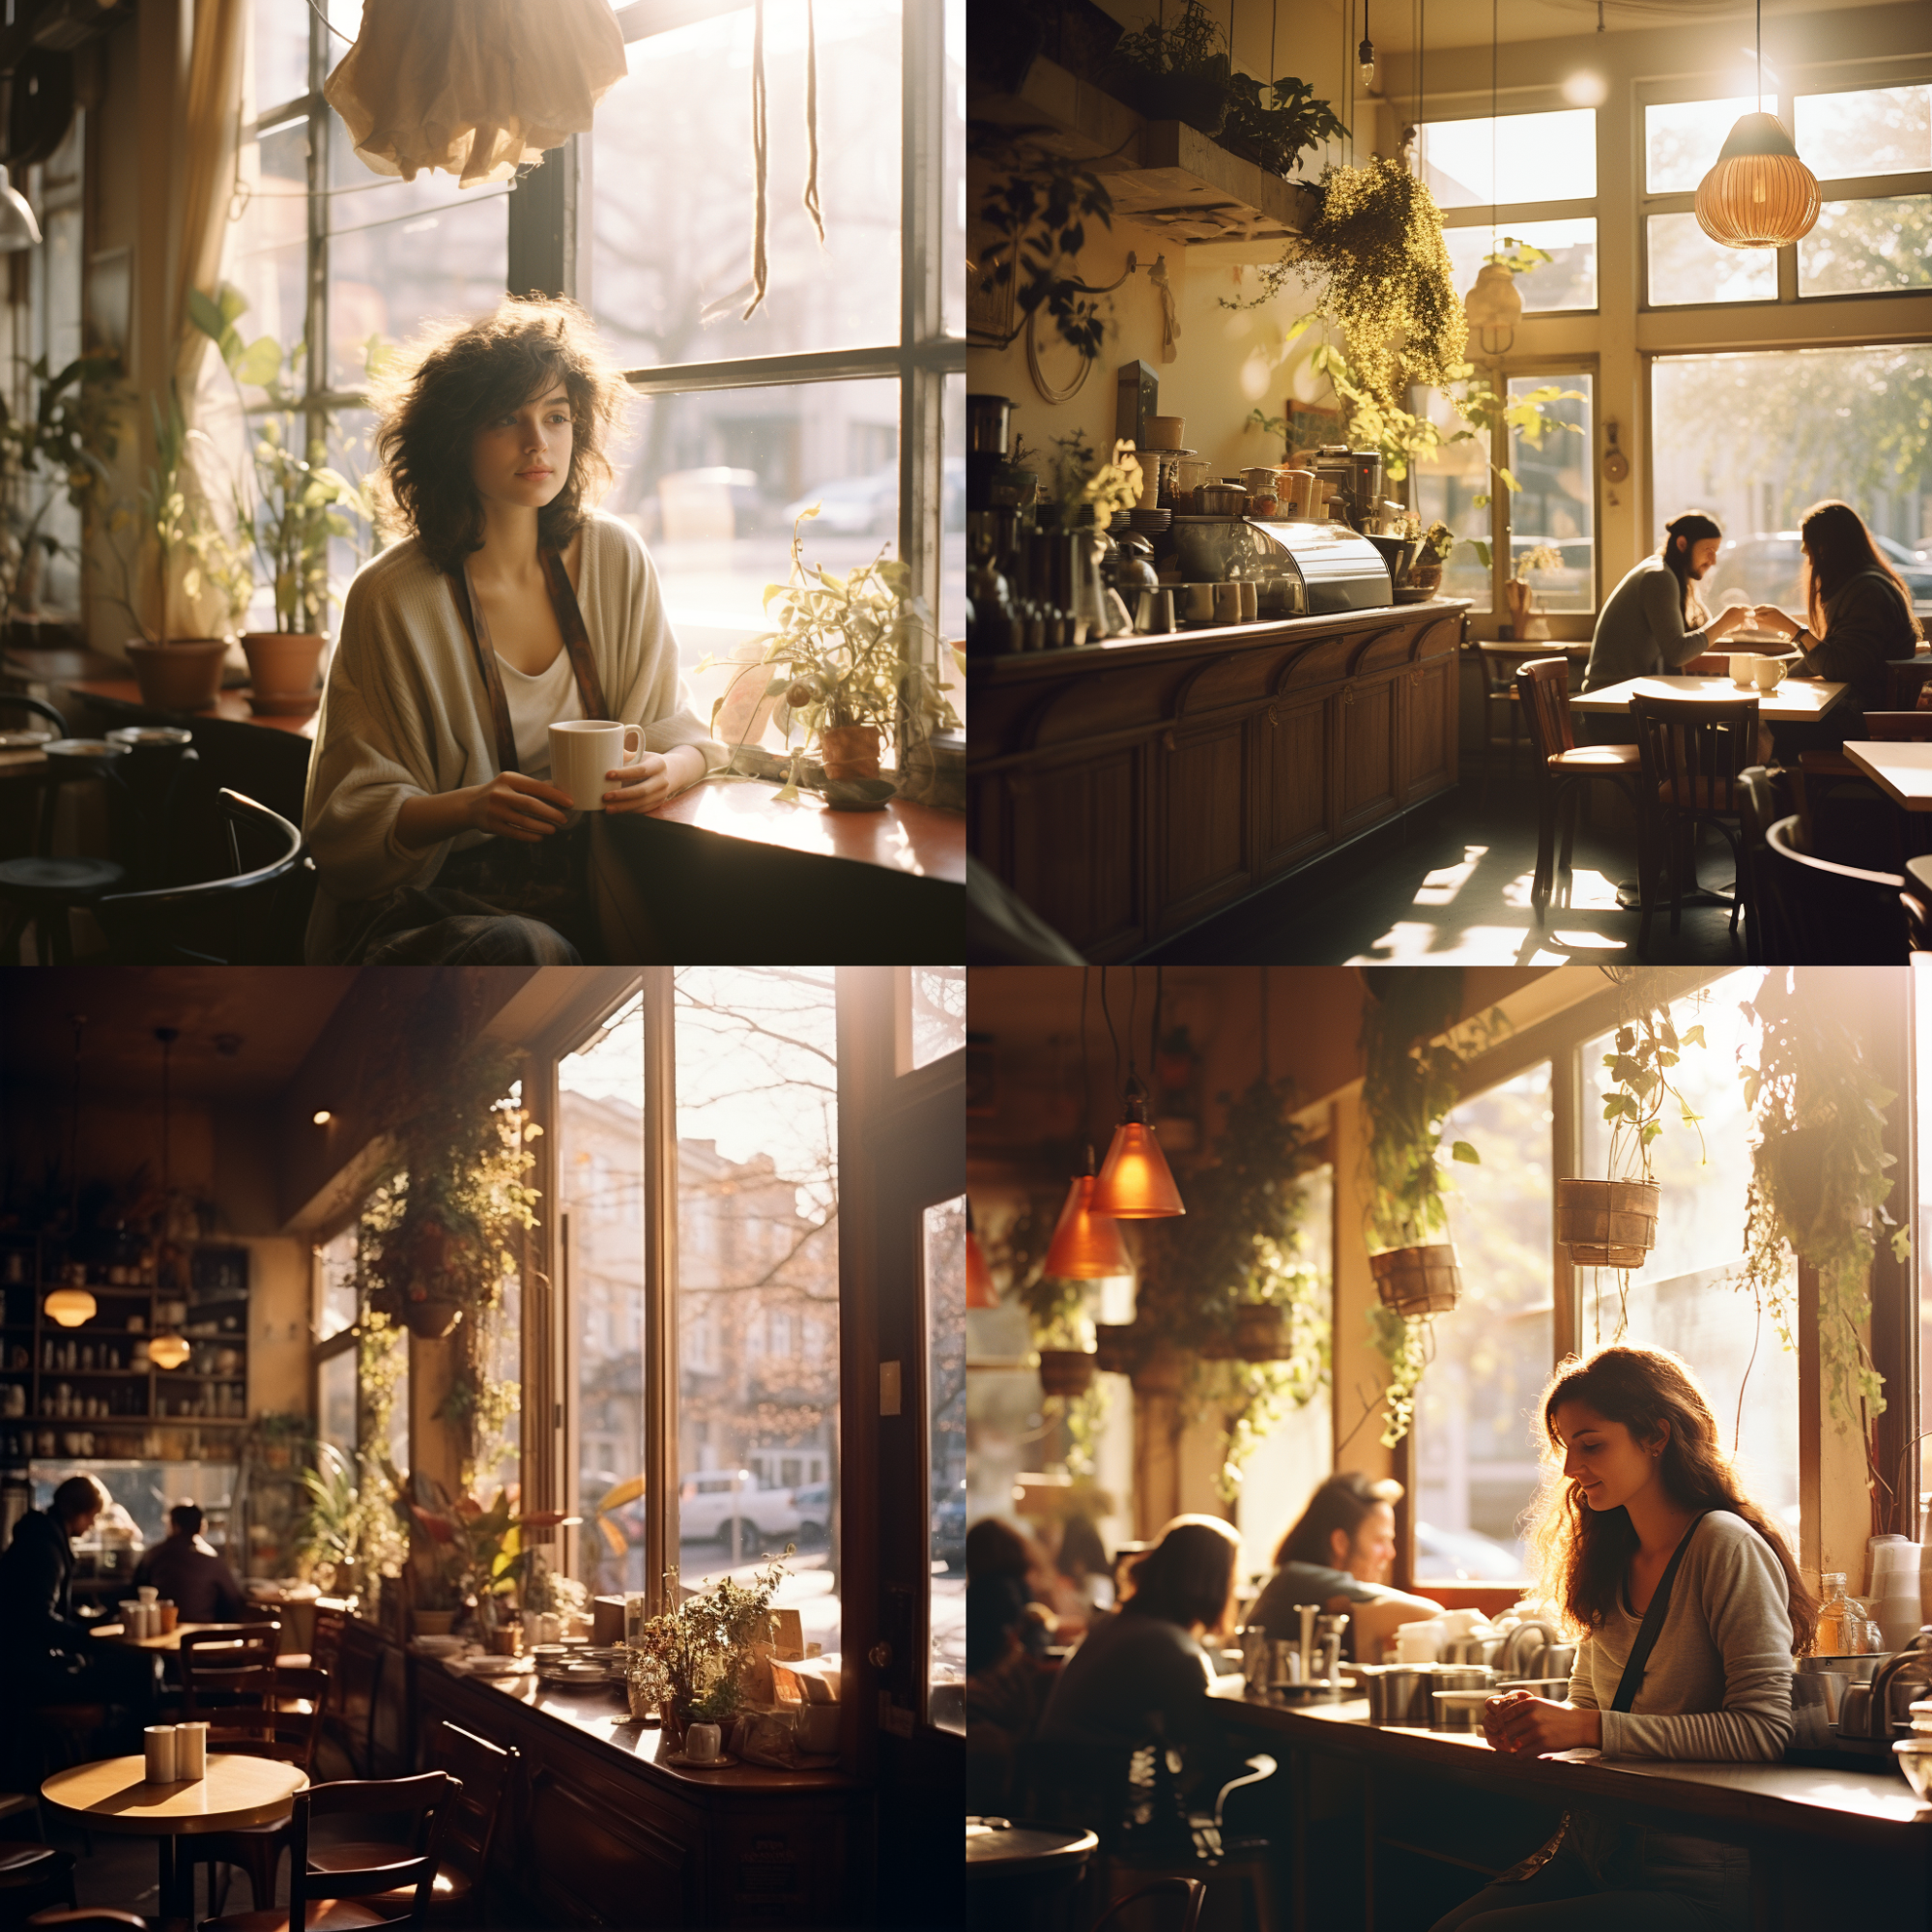 Four image options generated by Midjourney based on a café ambience prompt